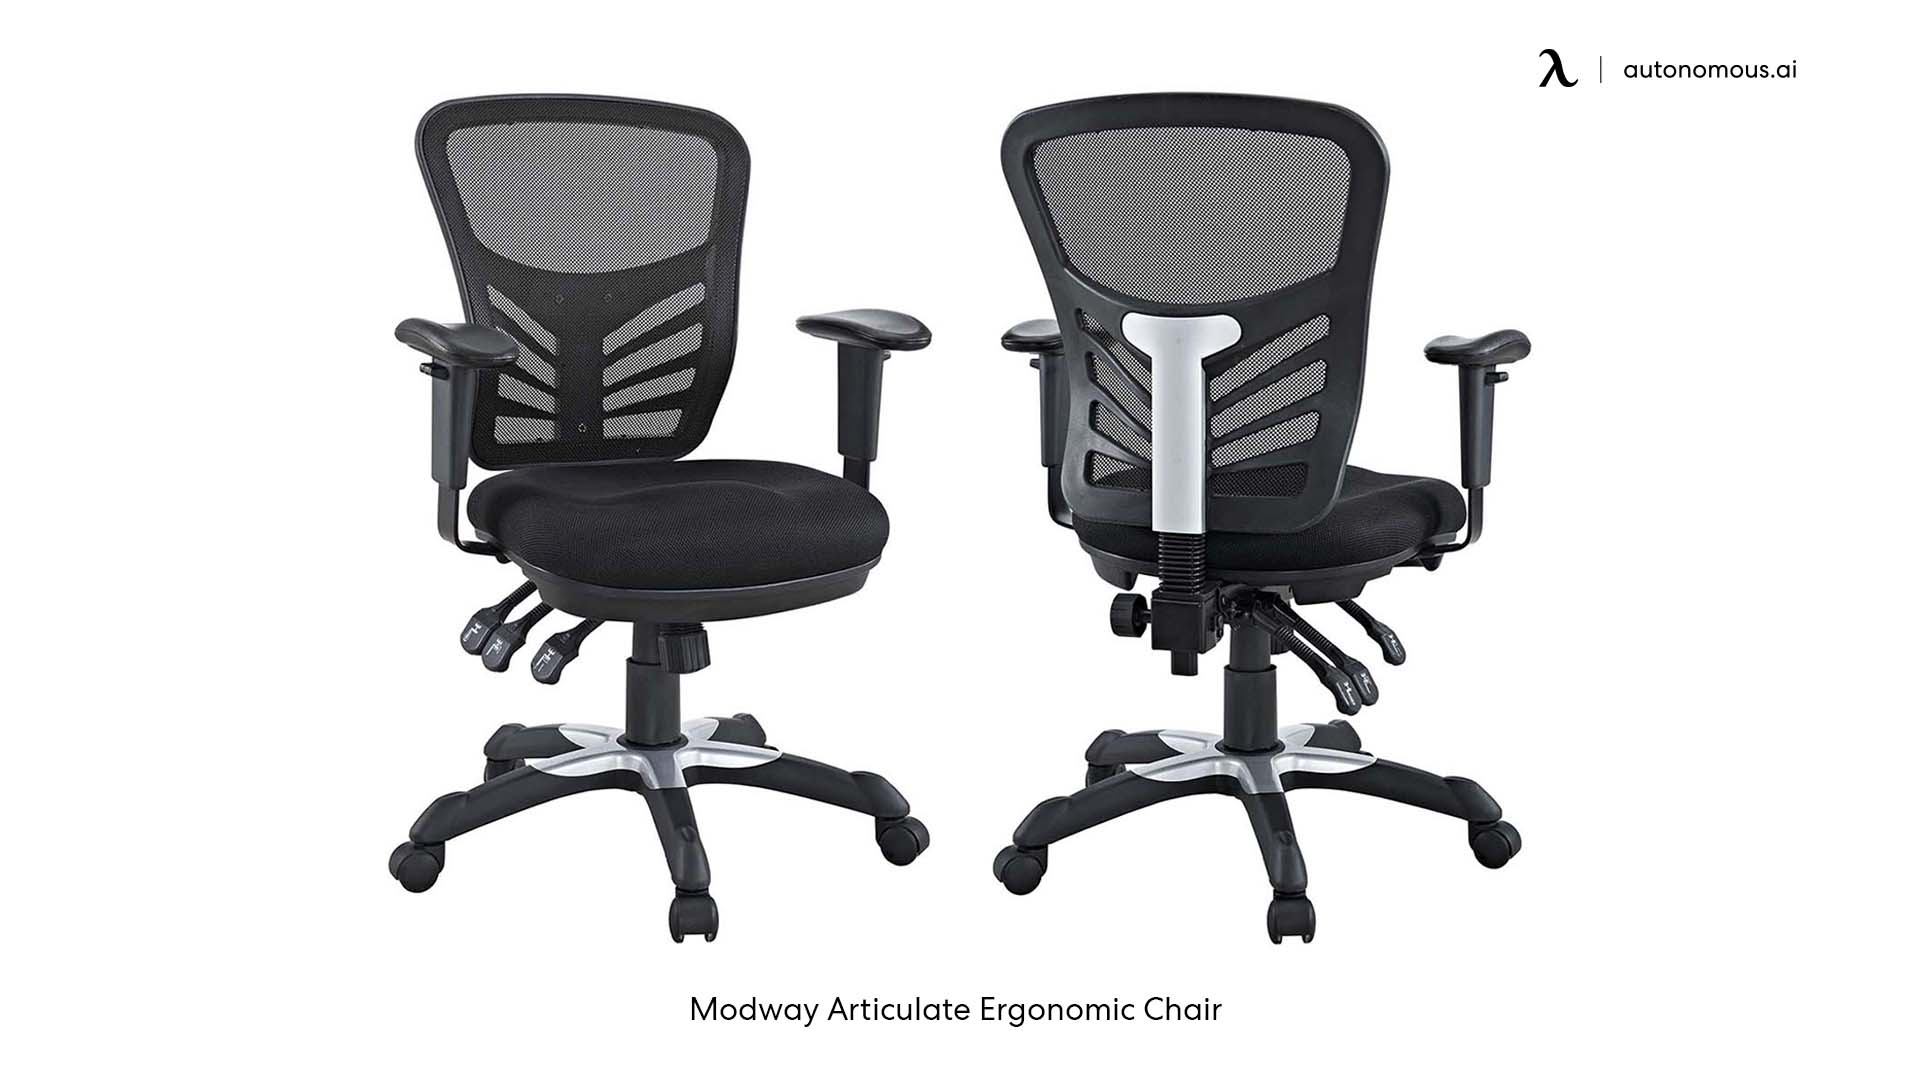 Modway Ergonomic mesh chair best chair for si joint pain